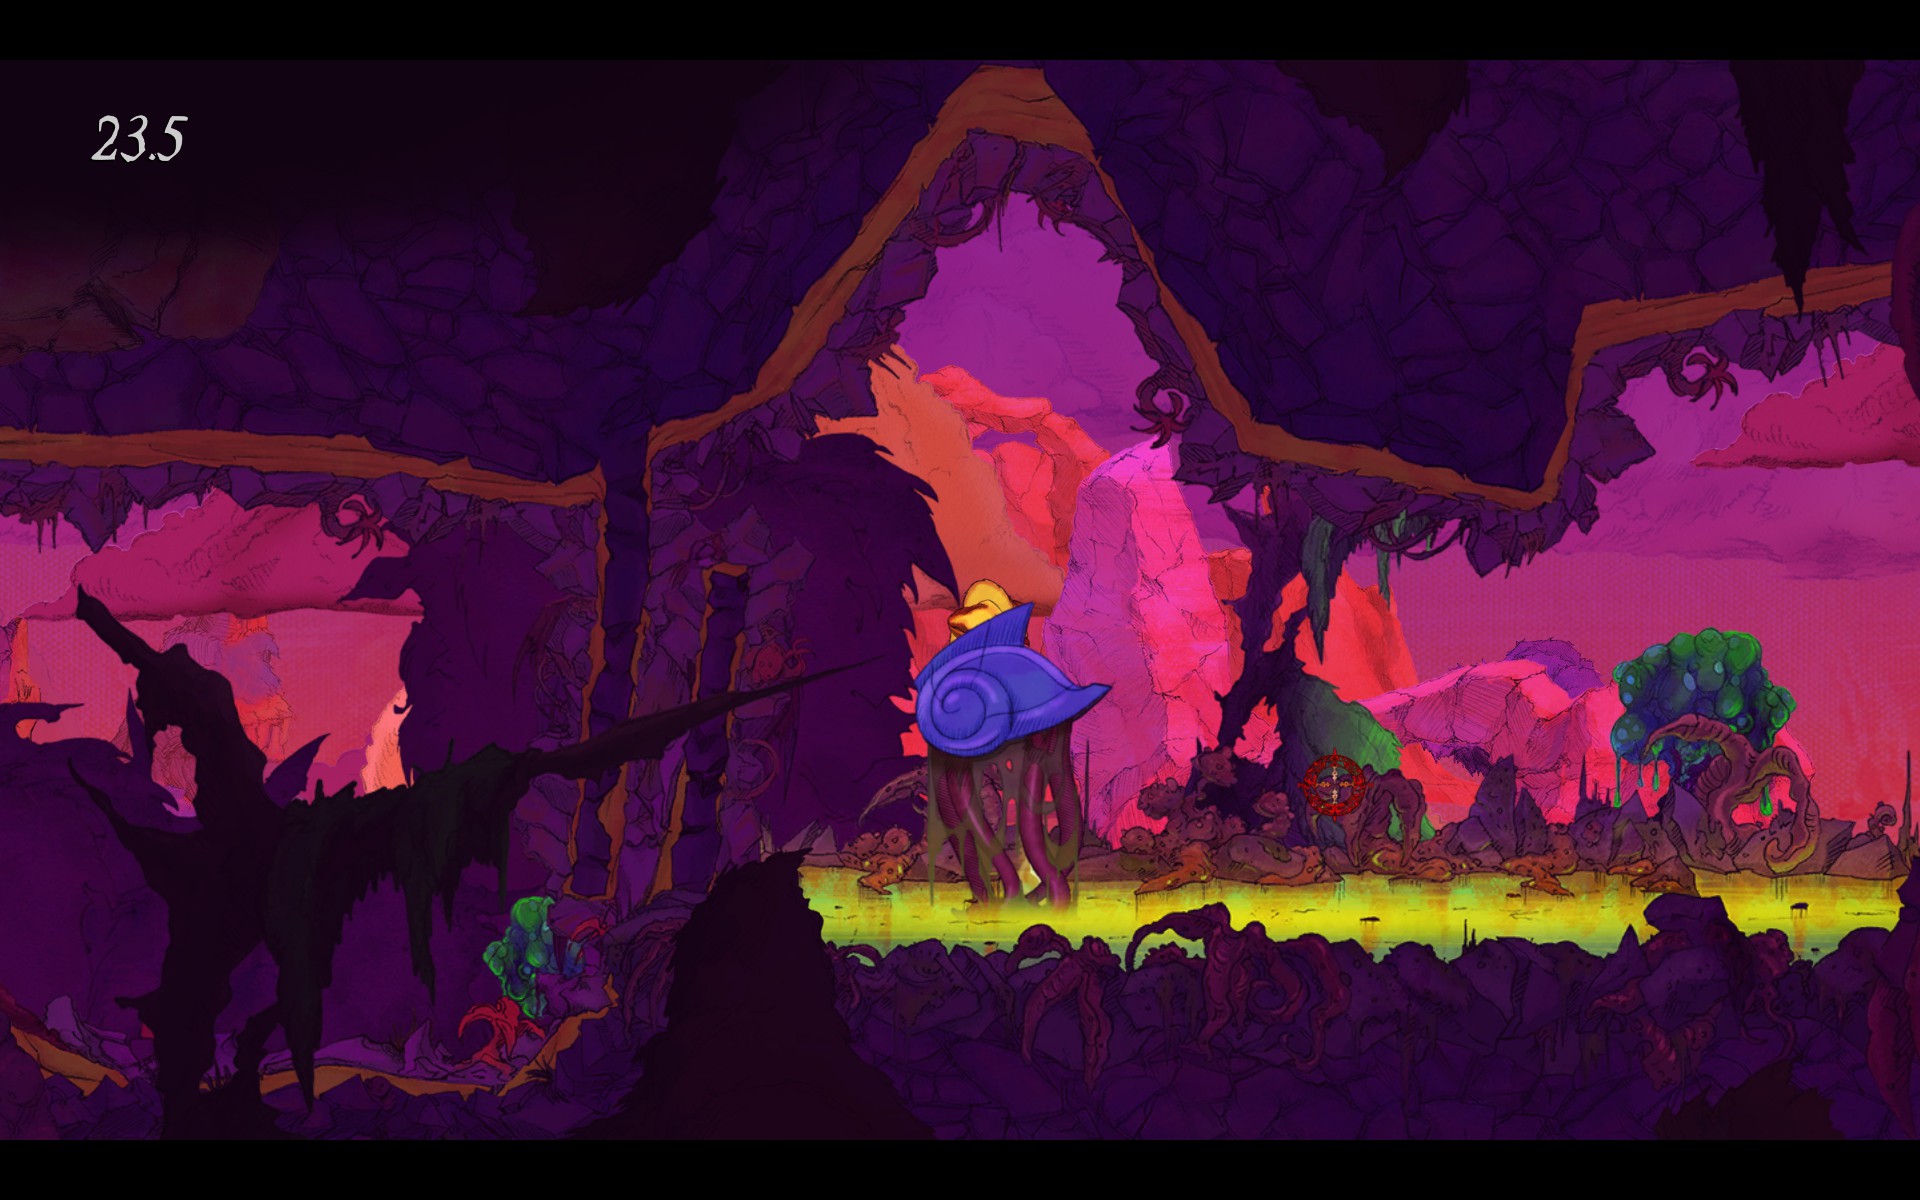 There are some funky, trip-induced levels and I love the vivid use of colors. If nothing else, this game looks beautiful. Creepy and deadly... but still beautiful.